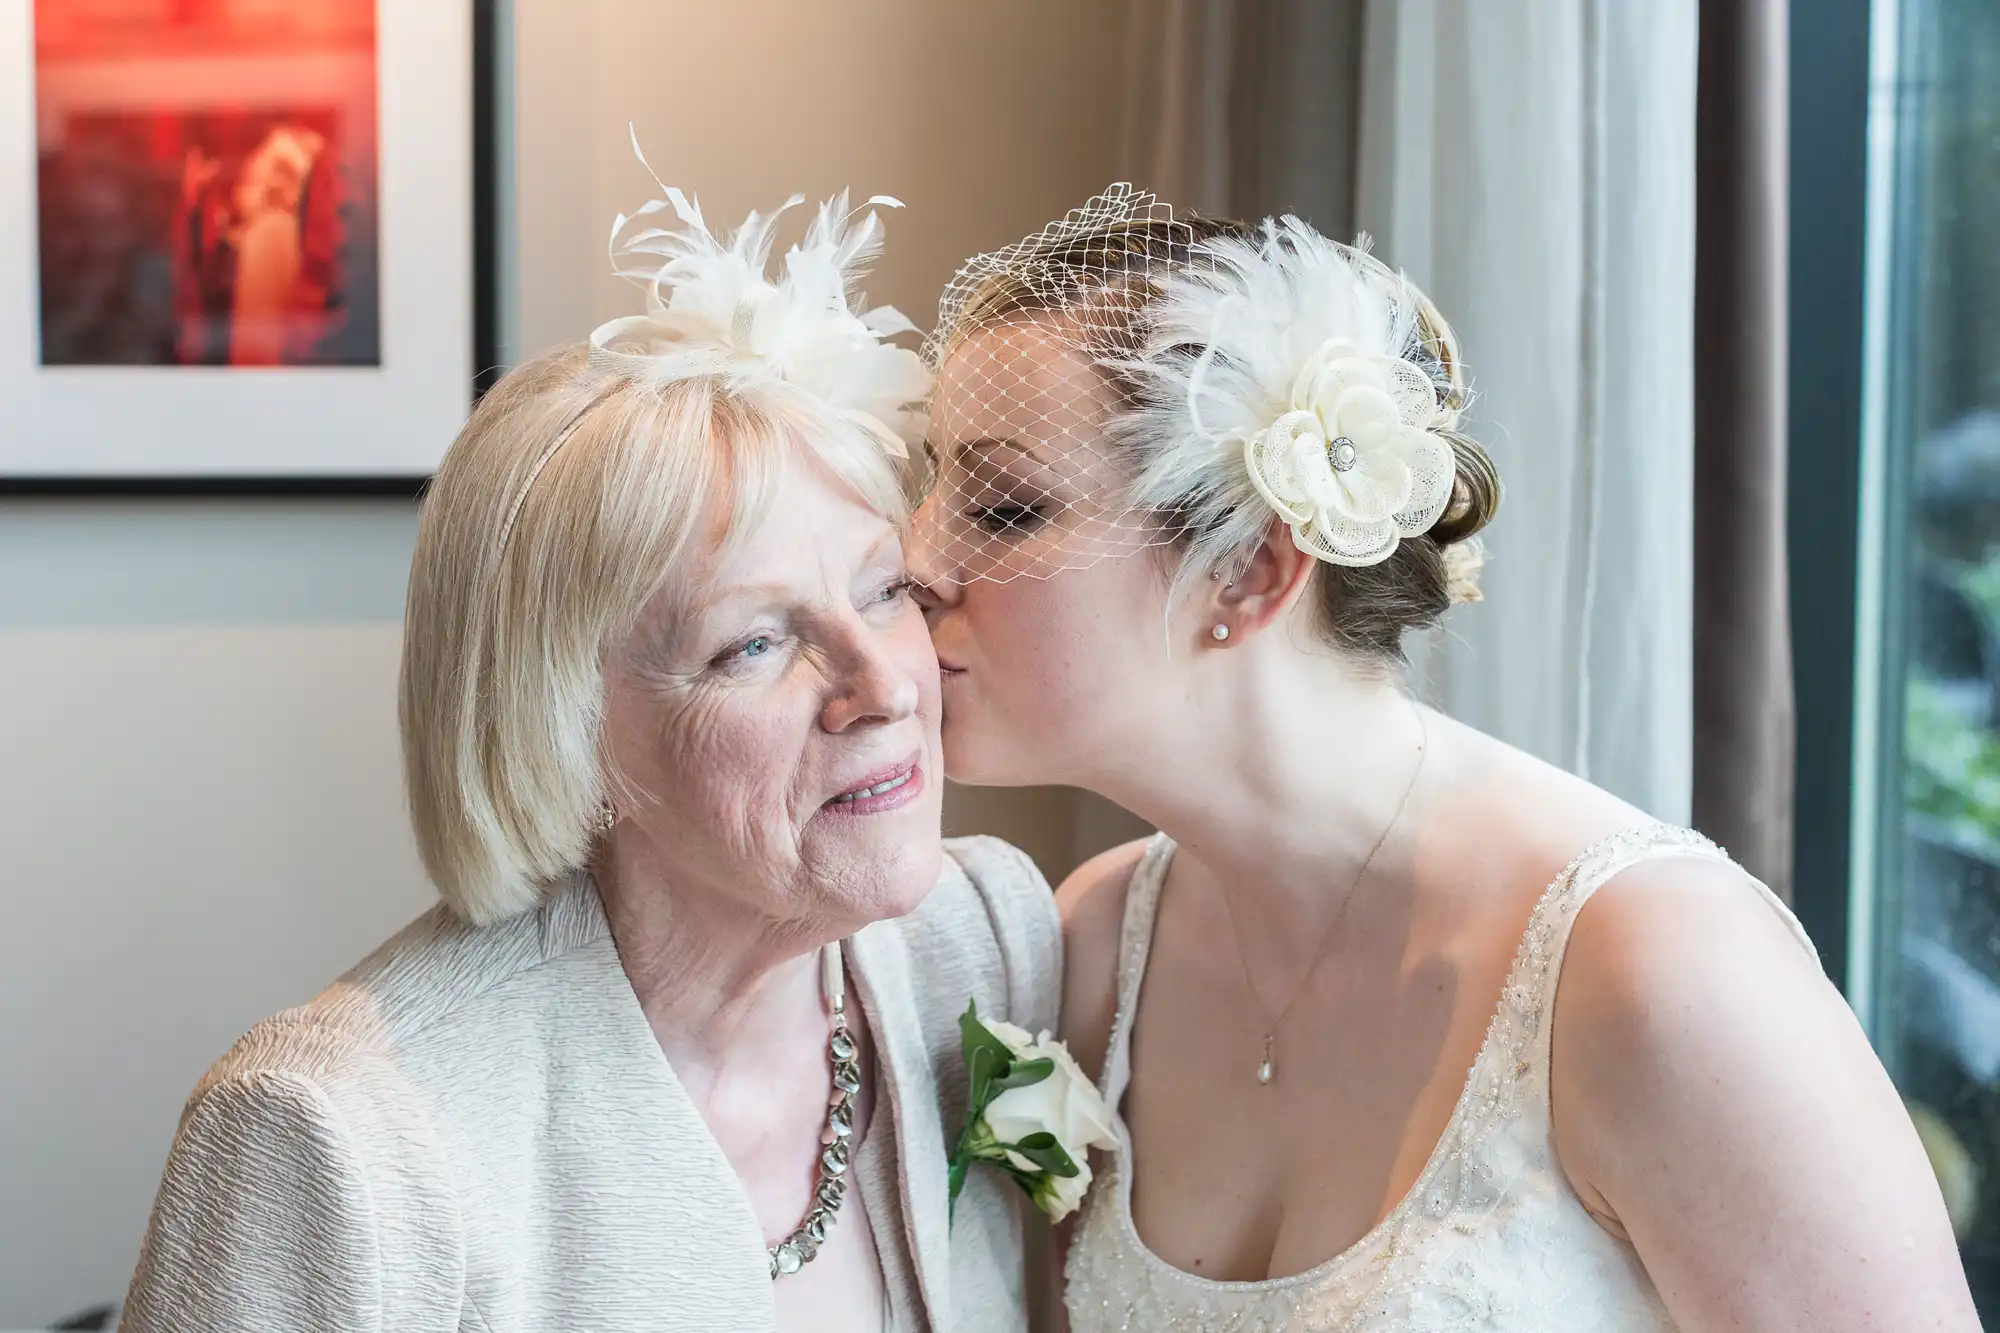 A bride in a white dress and hair accessory kisses an elderly woman on the cheek, both smiling happily indoors near a window.